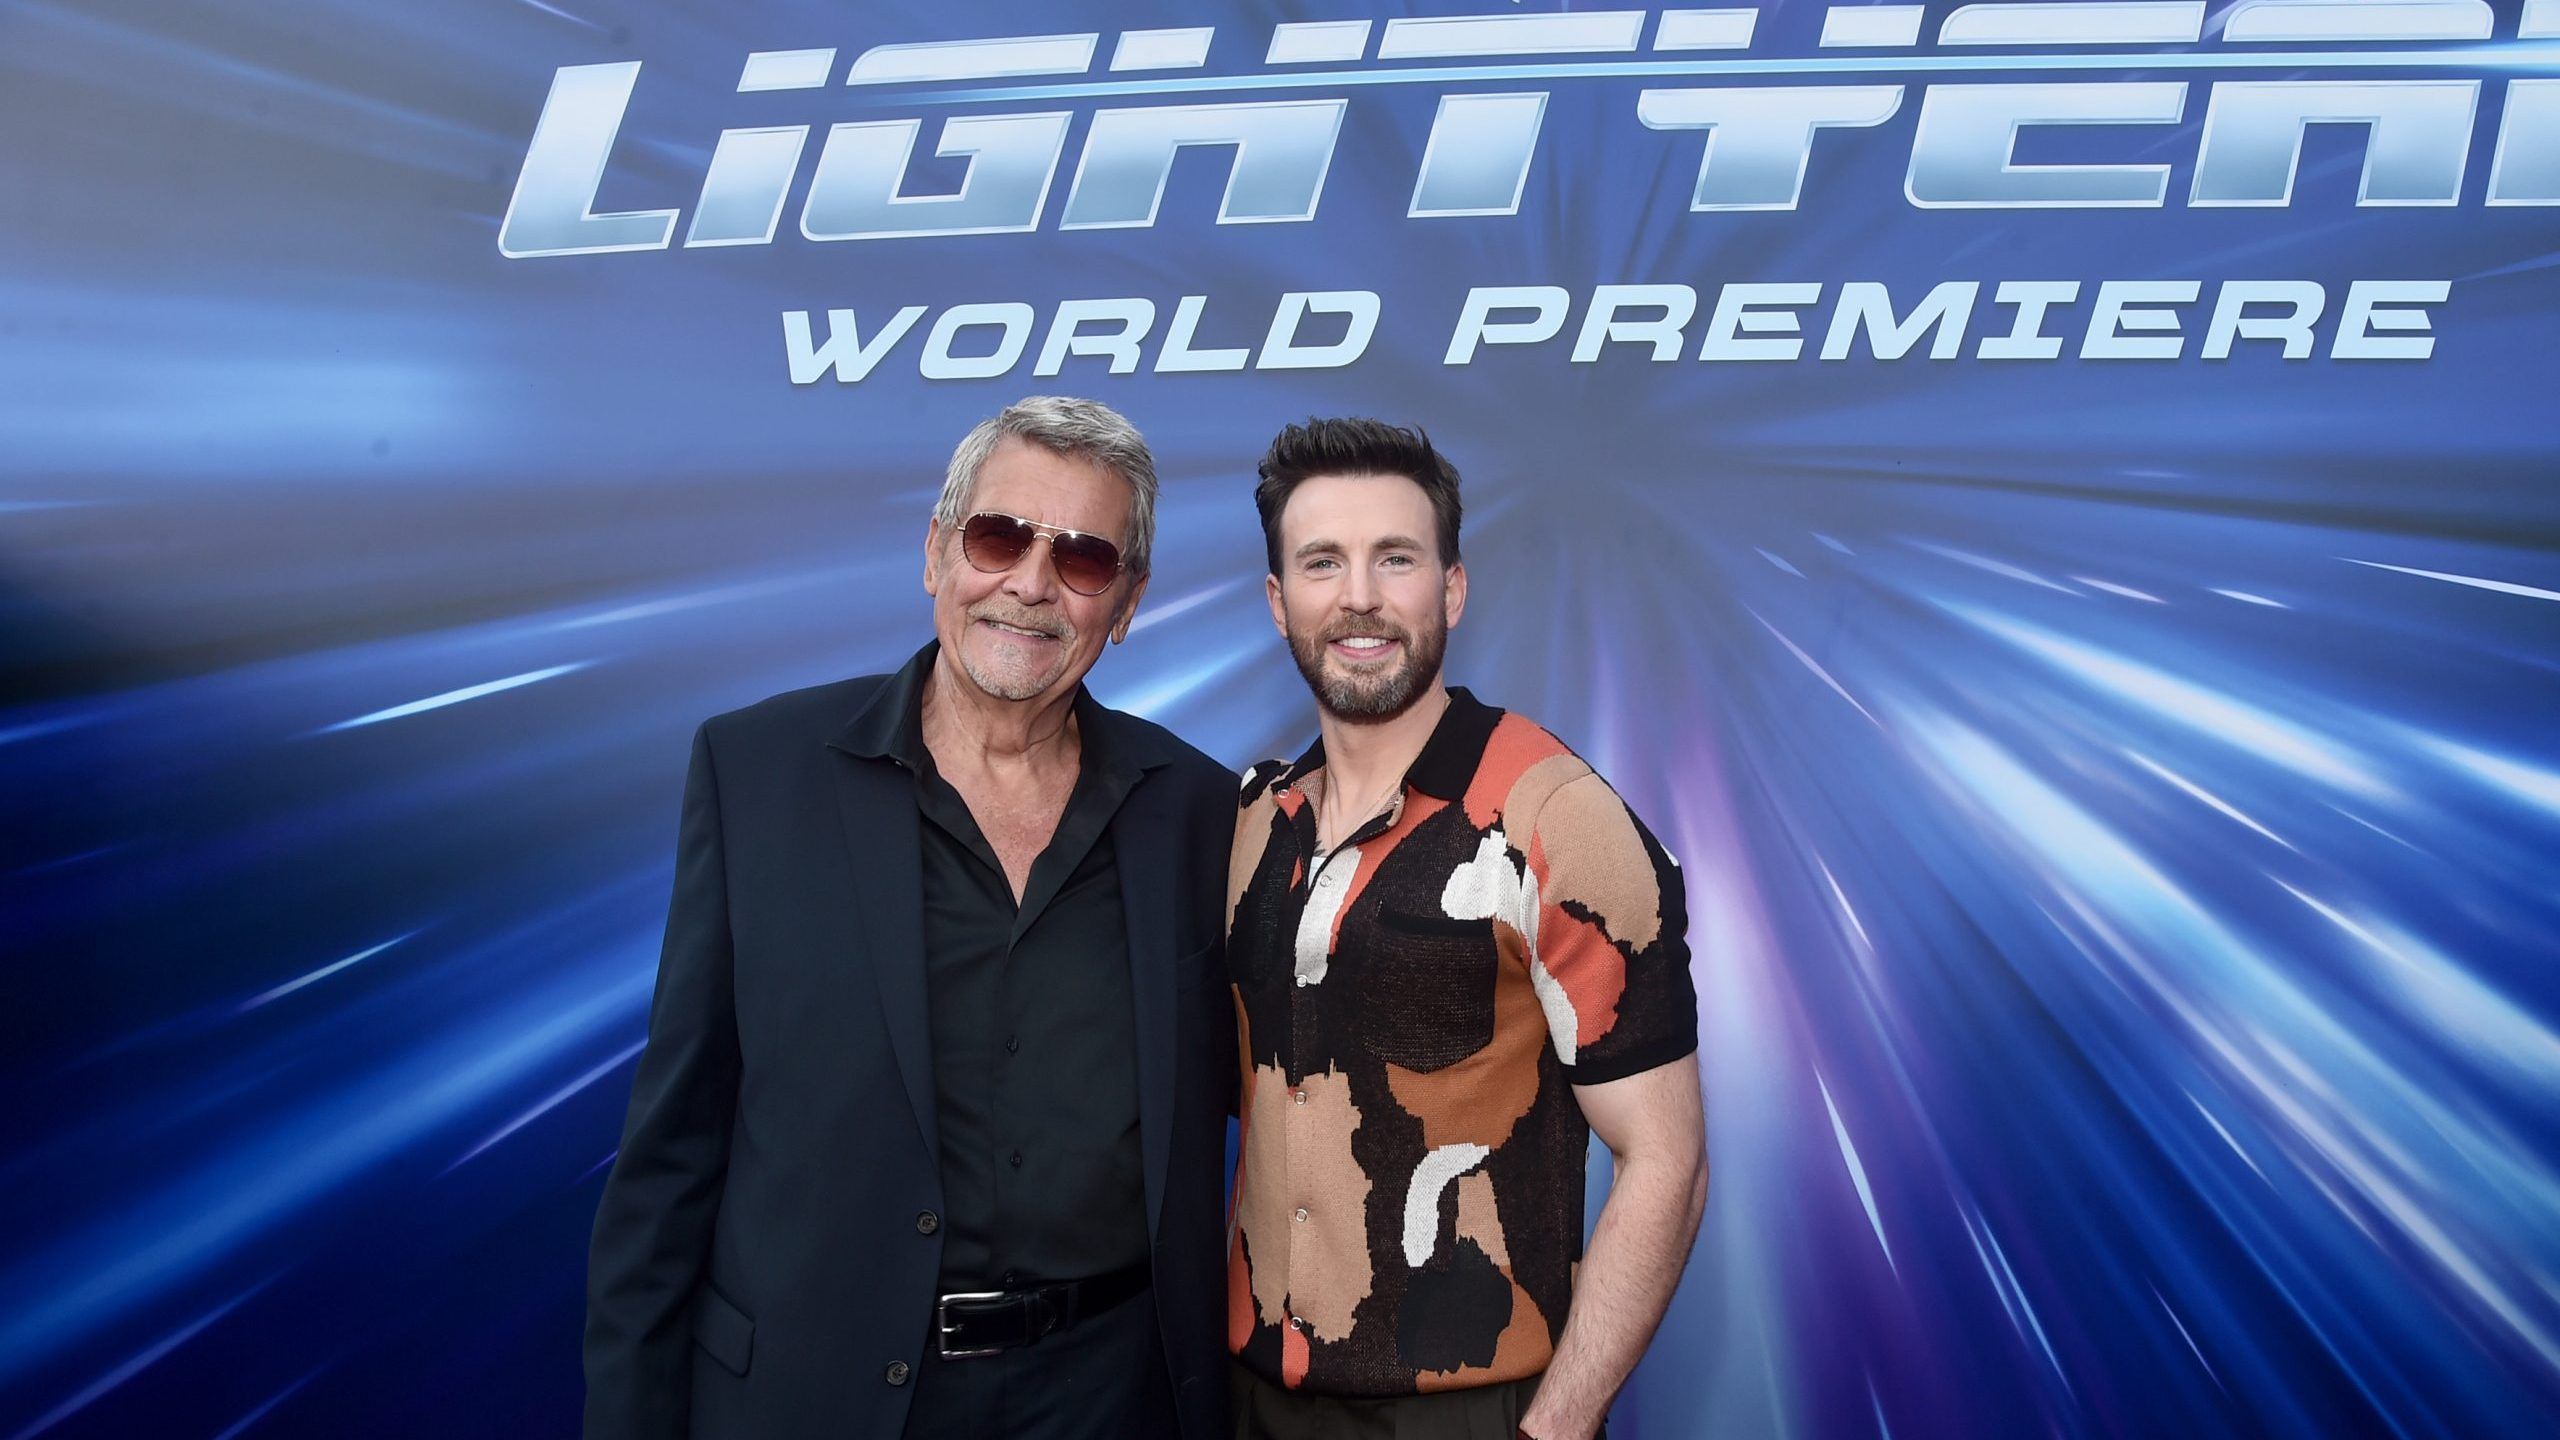 LOS ANGELES, CALIFORNIA - JUNE 08: (L-R) James Brolin and Chris Evans attend the World Premiere of Disney and Pixar's feature film "Lightyear" at El Capitan Theatre in Hollywood, California on June 08, 2022. (Photo by Alberto E. Rodriguez/Getty Images for Disney)